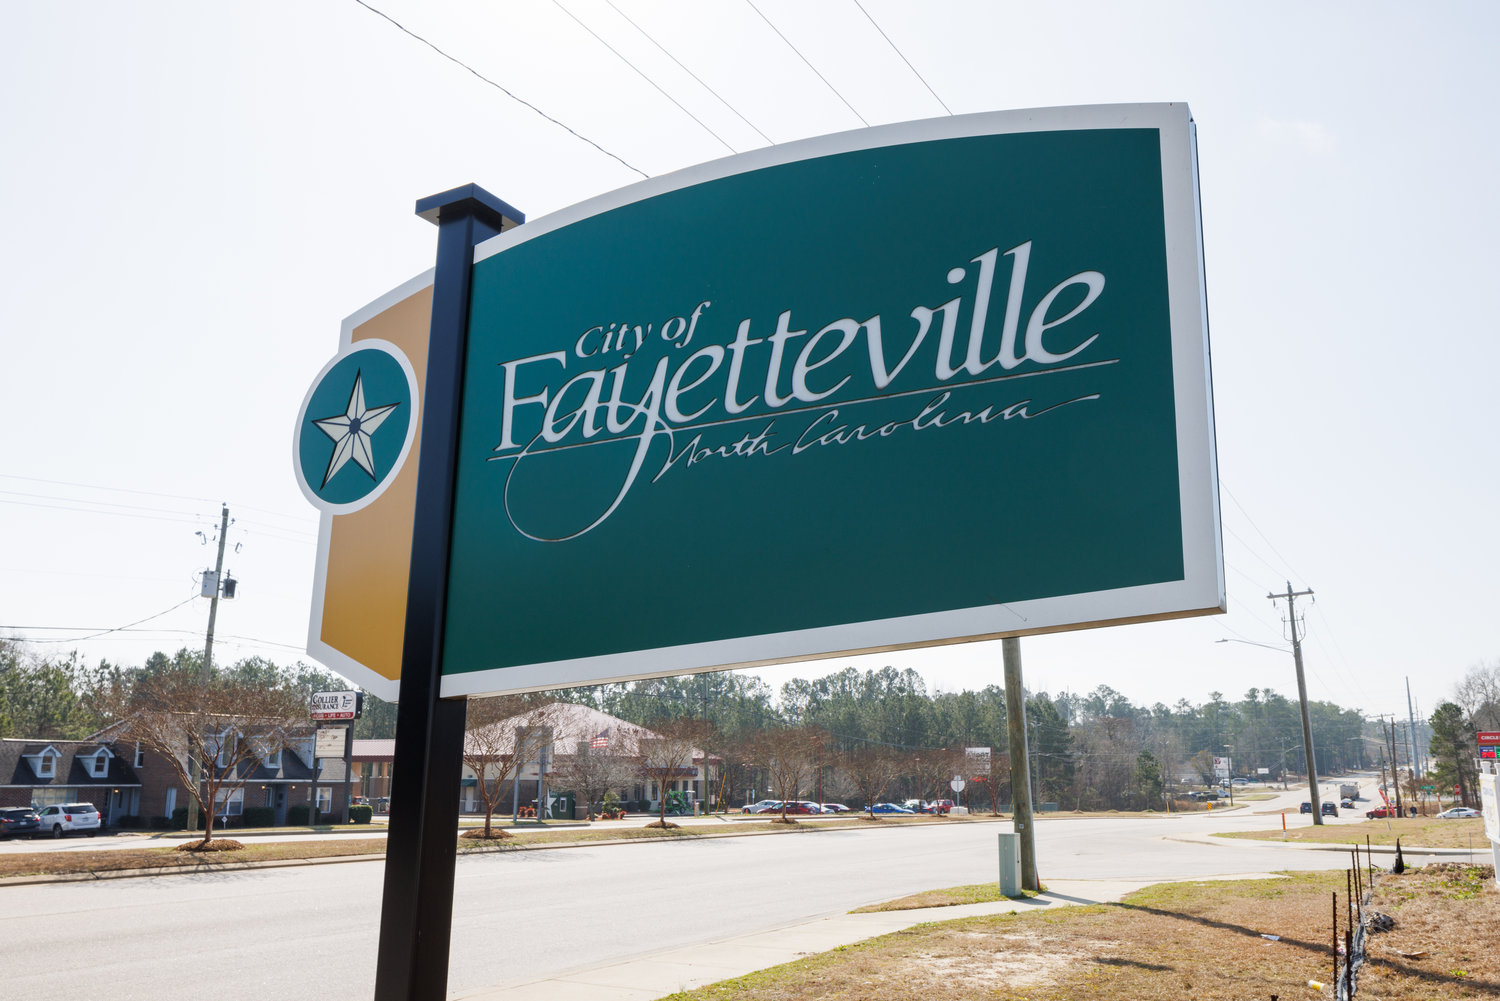 The Fayetteville City Council on Monday night is expected to consider a resolution that would allow voters to decide whether to change the way council members are elected.